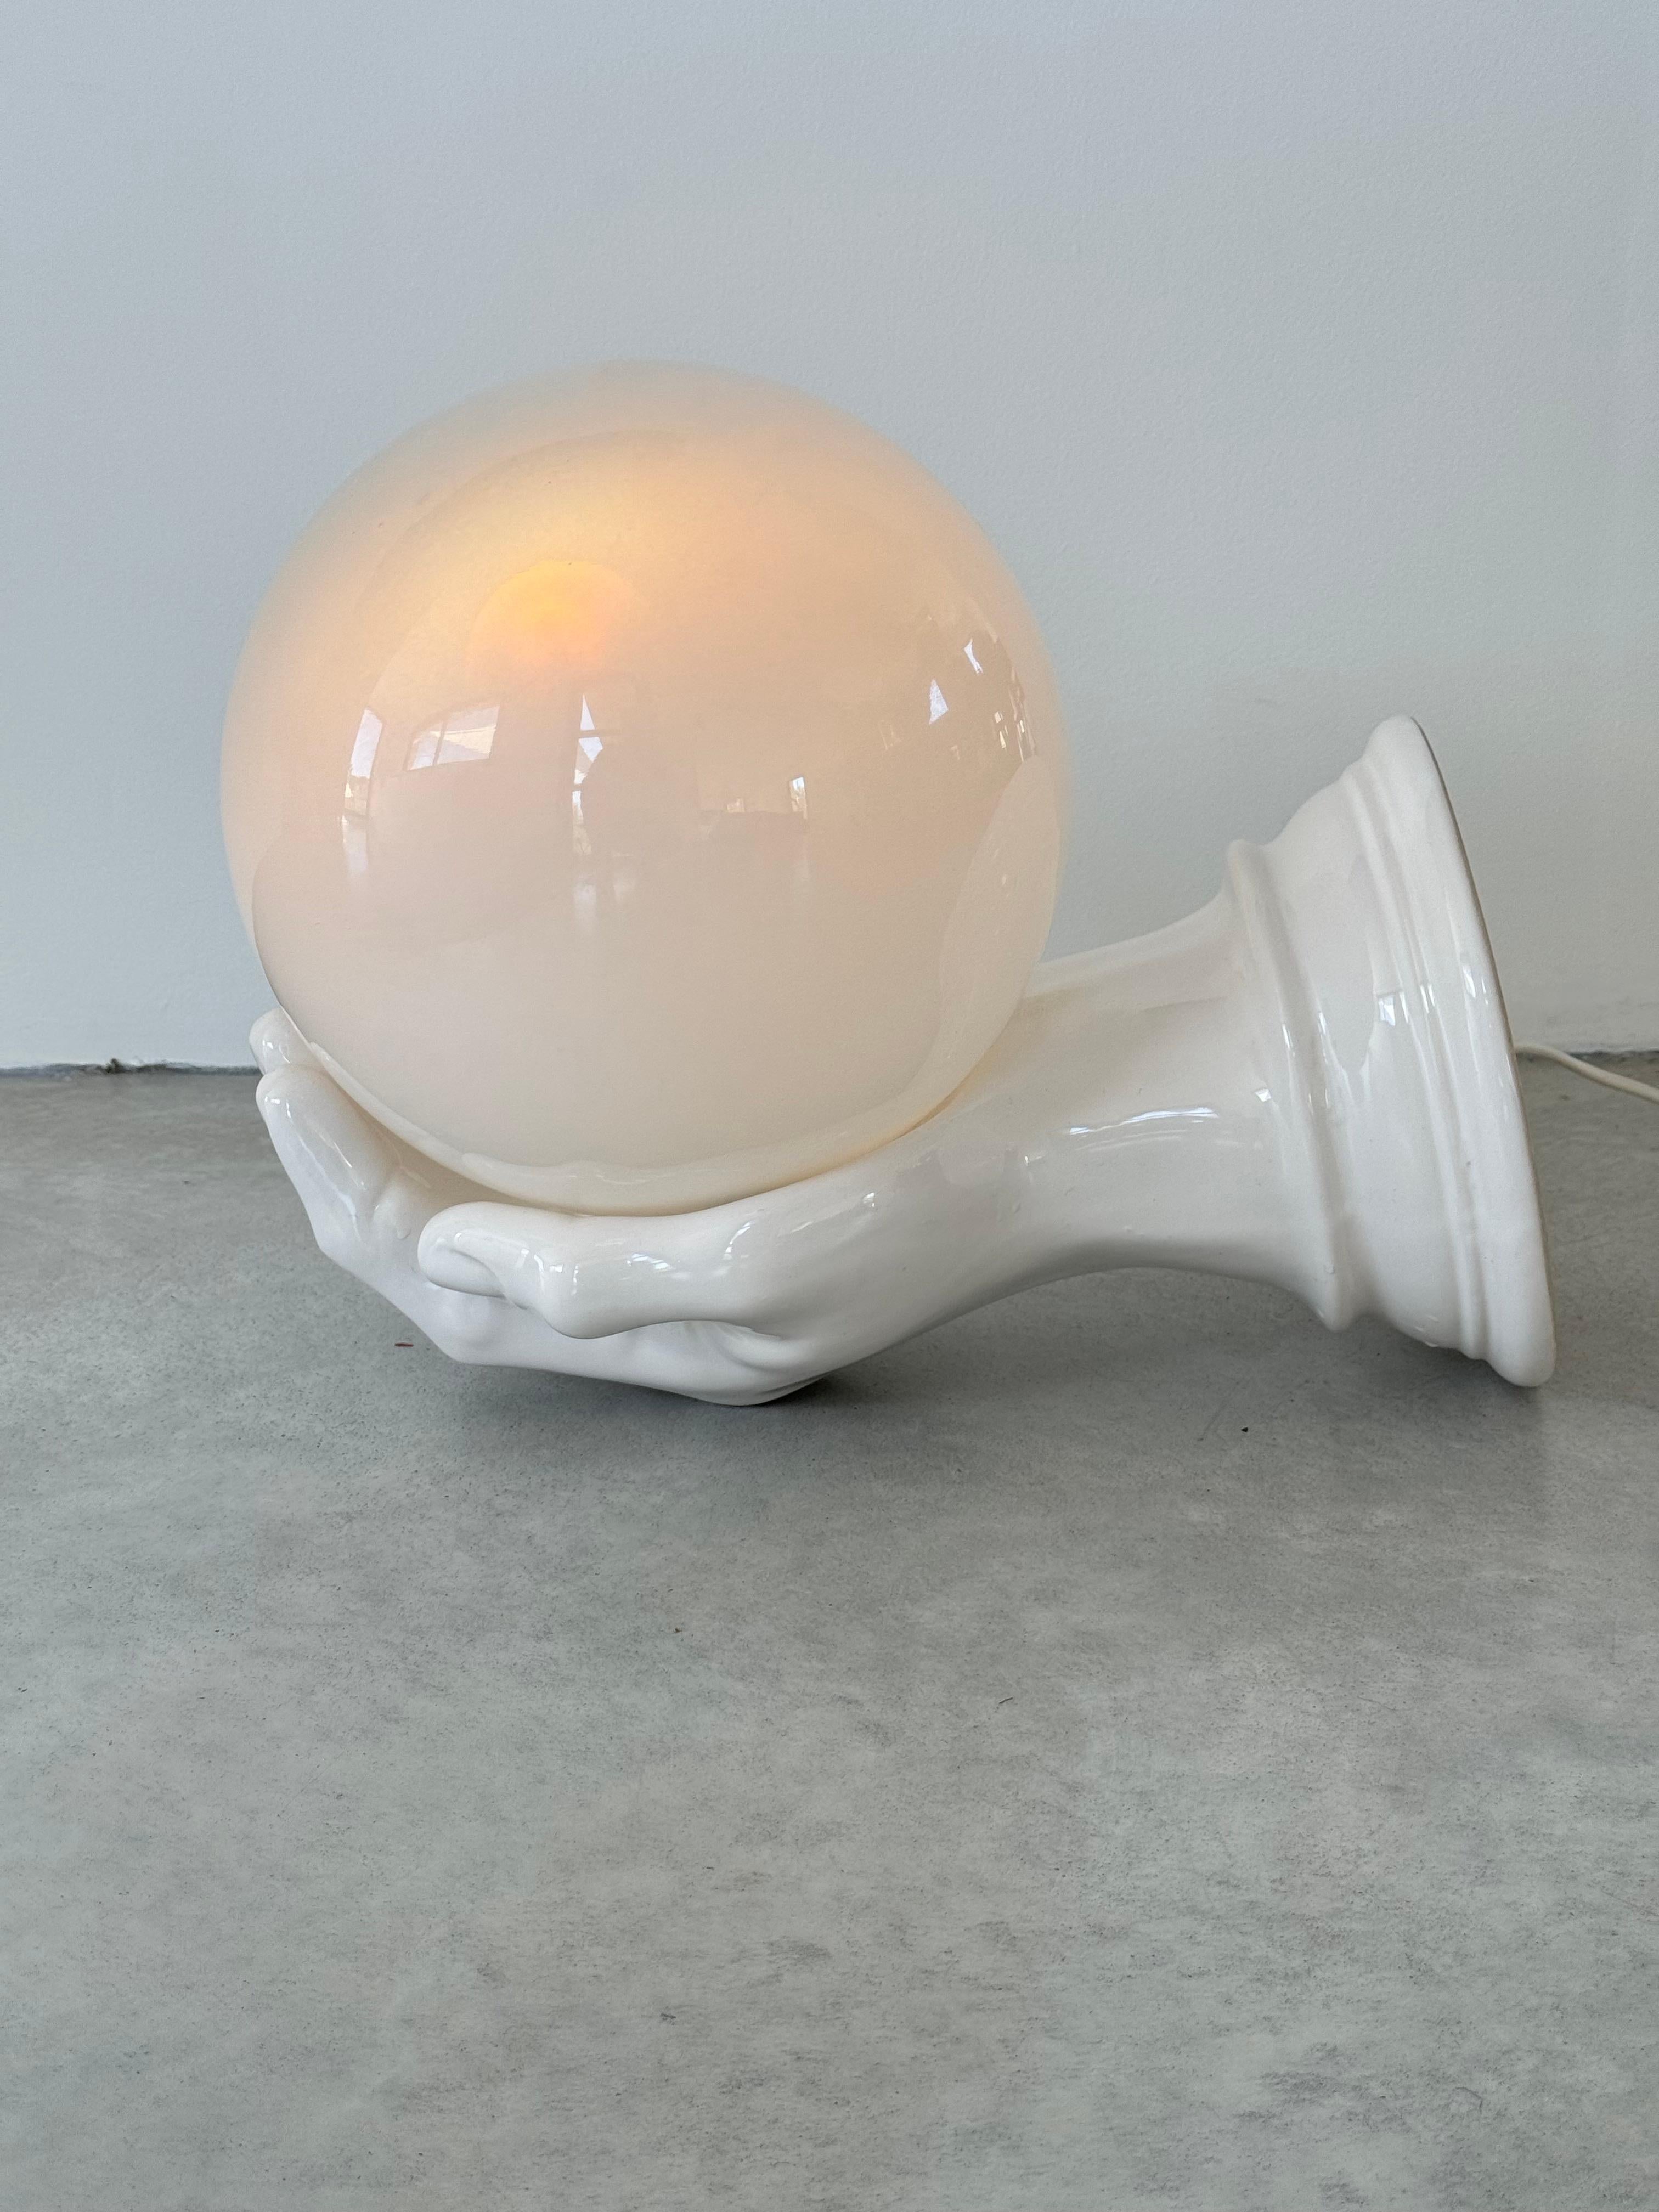 Huge ceramic wall light in the shape of a left hand.

Extremely rare with this large size

An opalescent Murano glass globe (diameter 9.8'') is placed in the palm of the hand.
The lamp attaches to the wall. There are two fixing holes for perfect